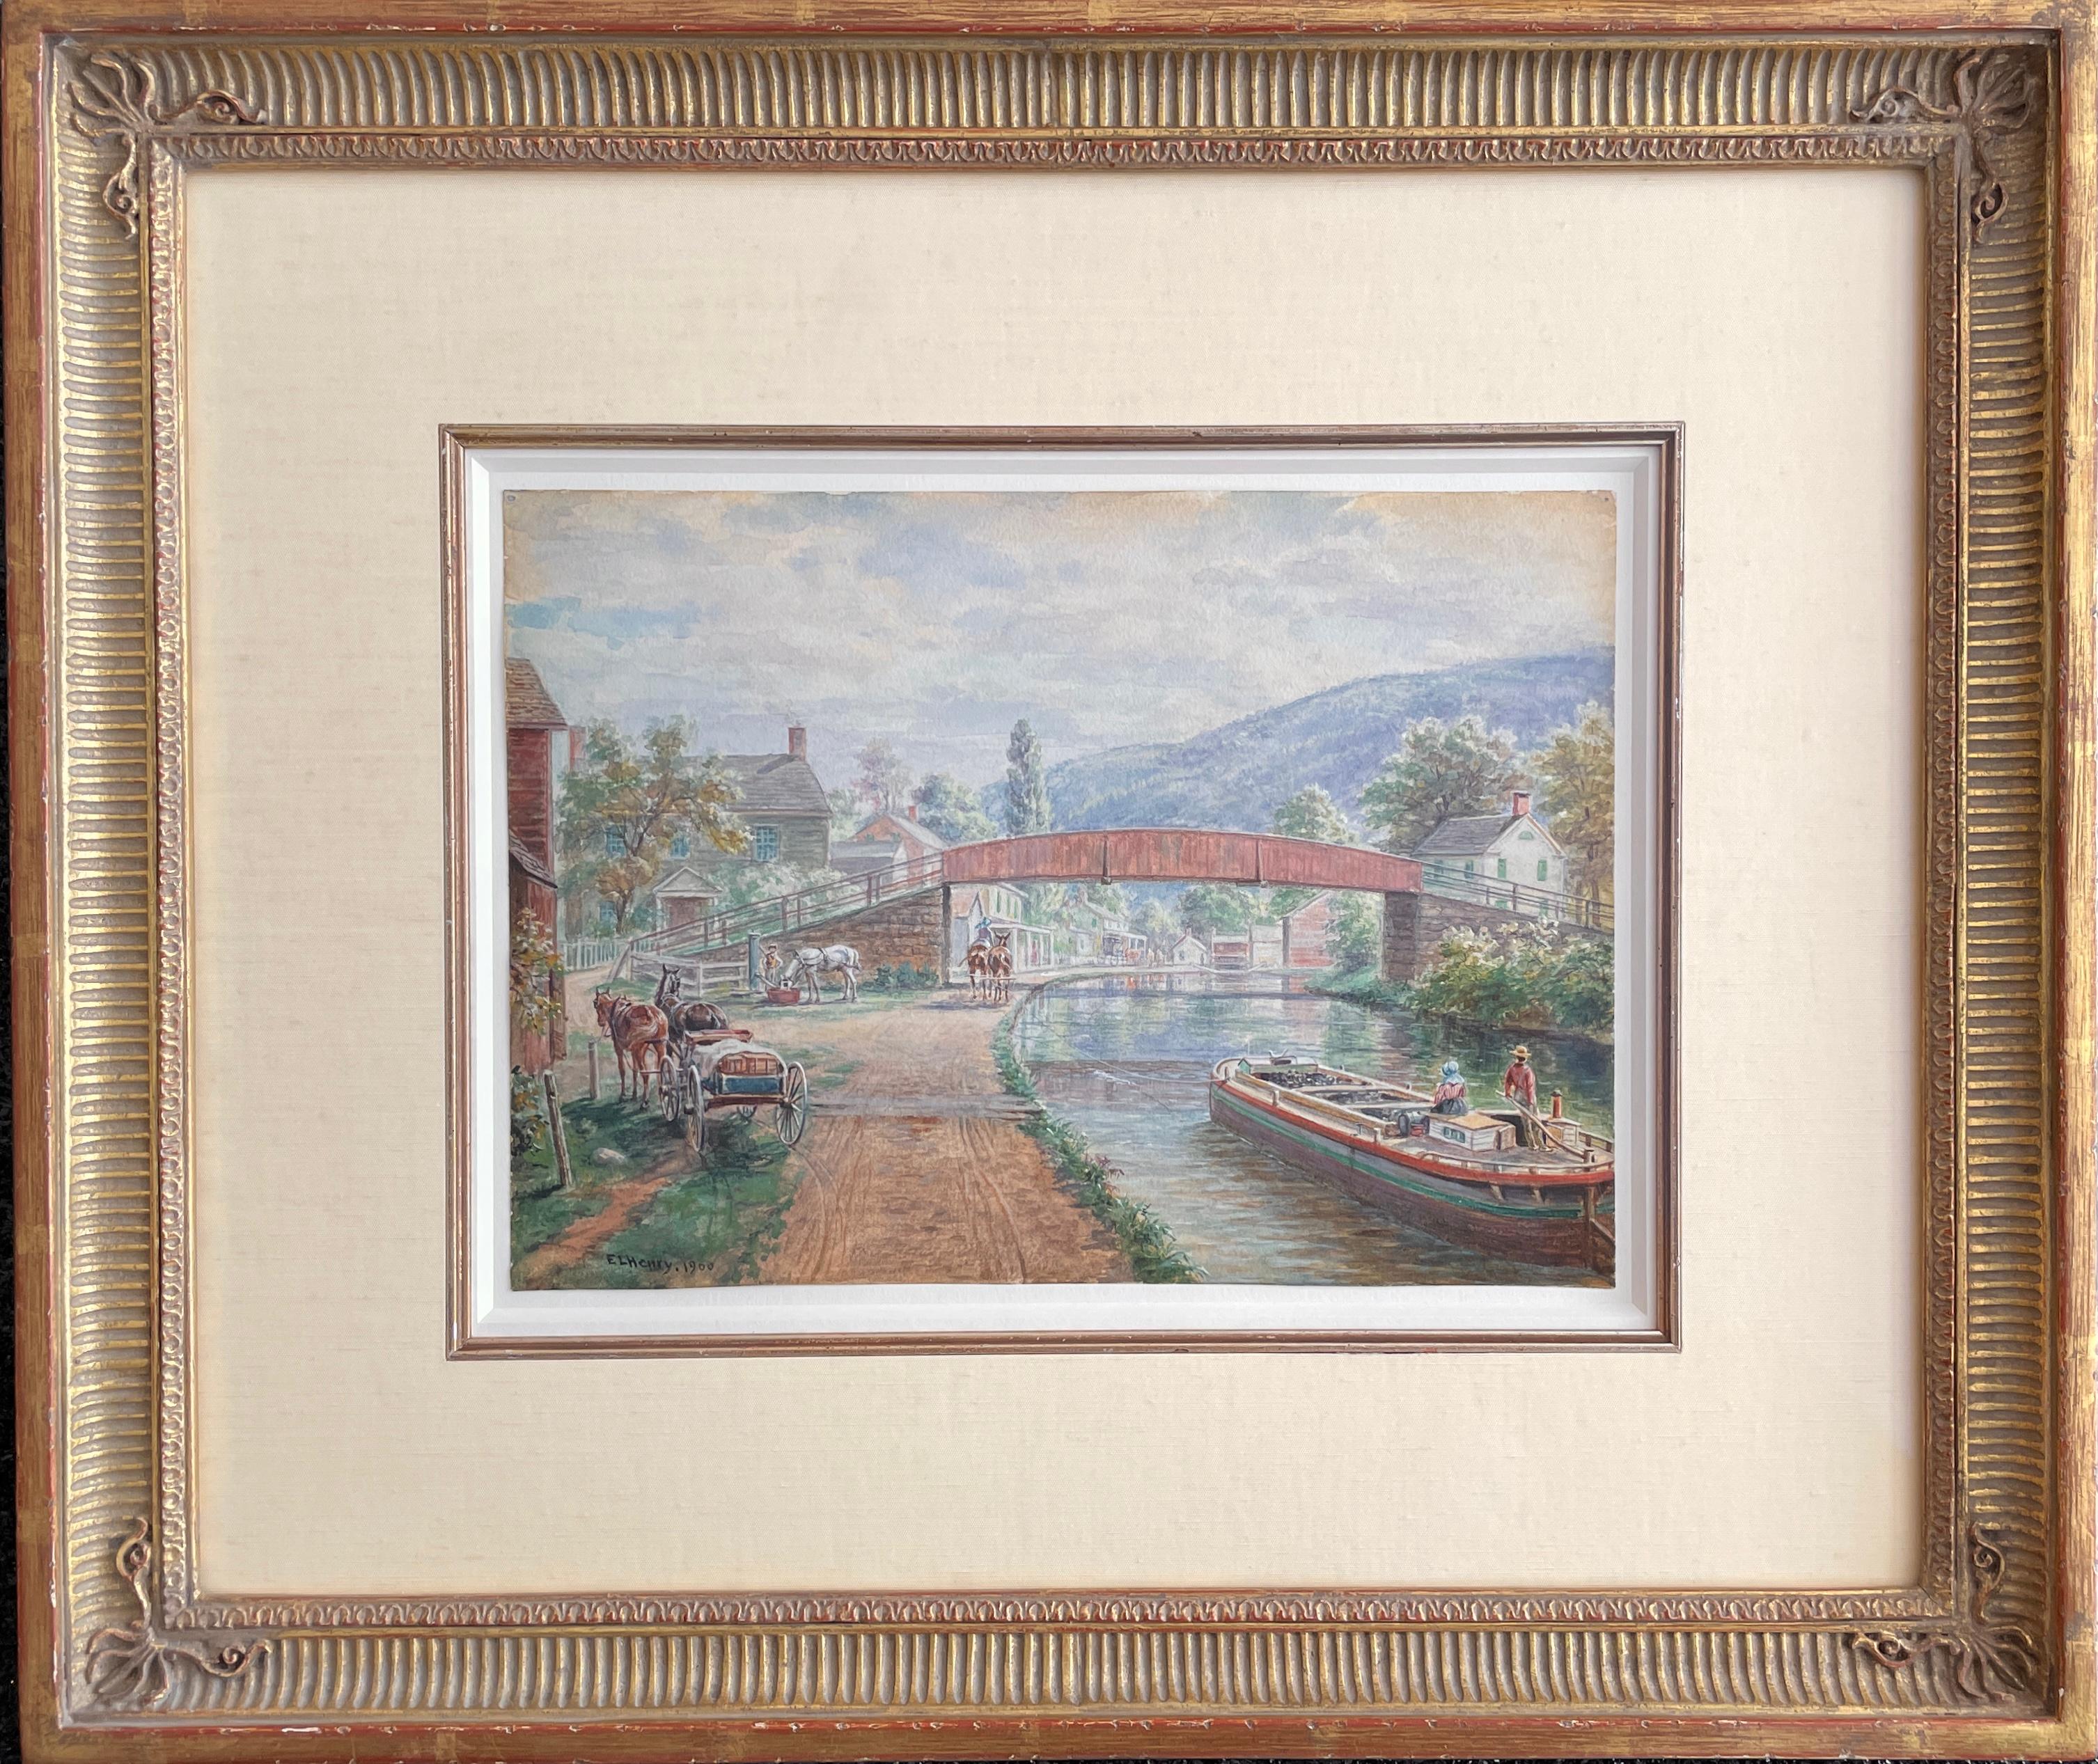 Original watercolor by Edward Lamson Henry looking back at barge travel through small New York state towns. 

Delaware & Hudson Canal, Ellenville NY (1900)
Watercolor on paper
8 ¼" x 11"18" x 21 ¼" x 1 ½" framed
Signed "EL Henry, 1900" lower